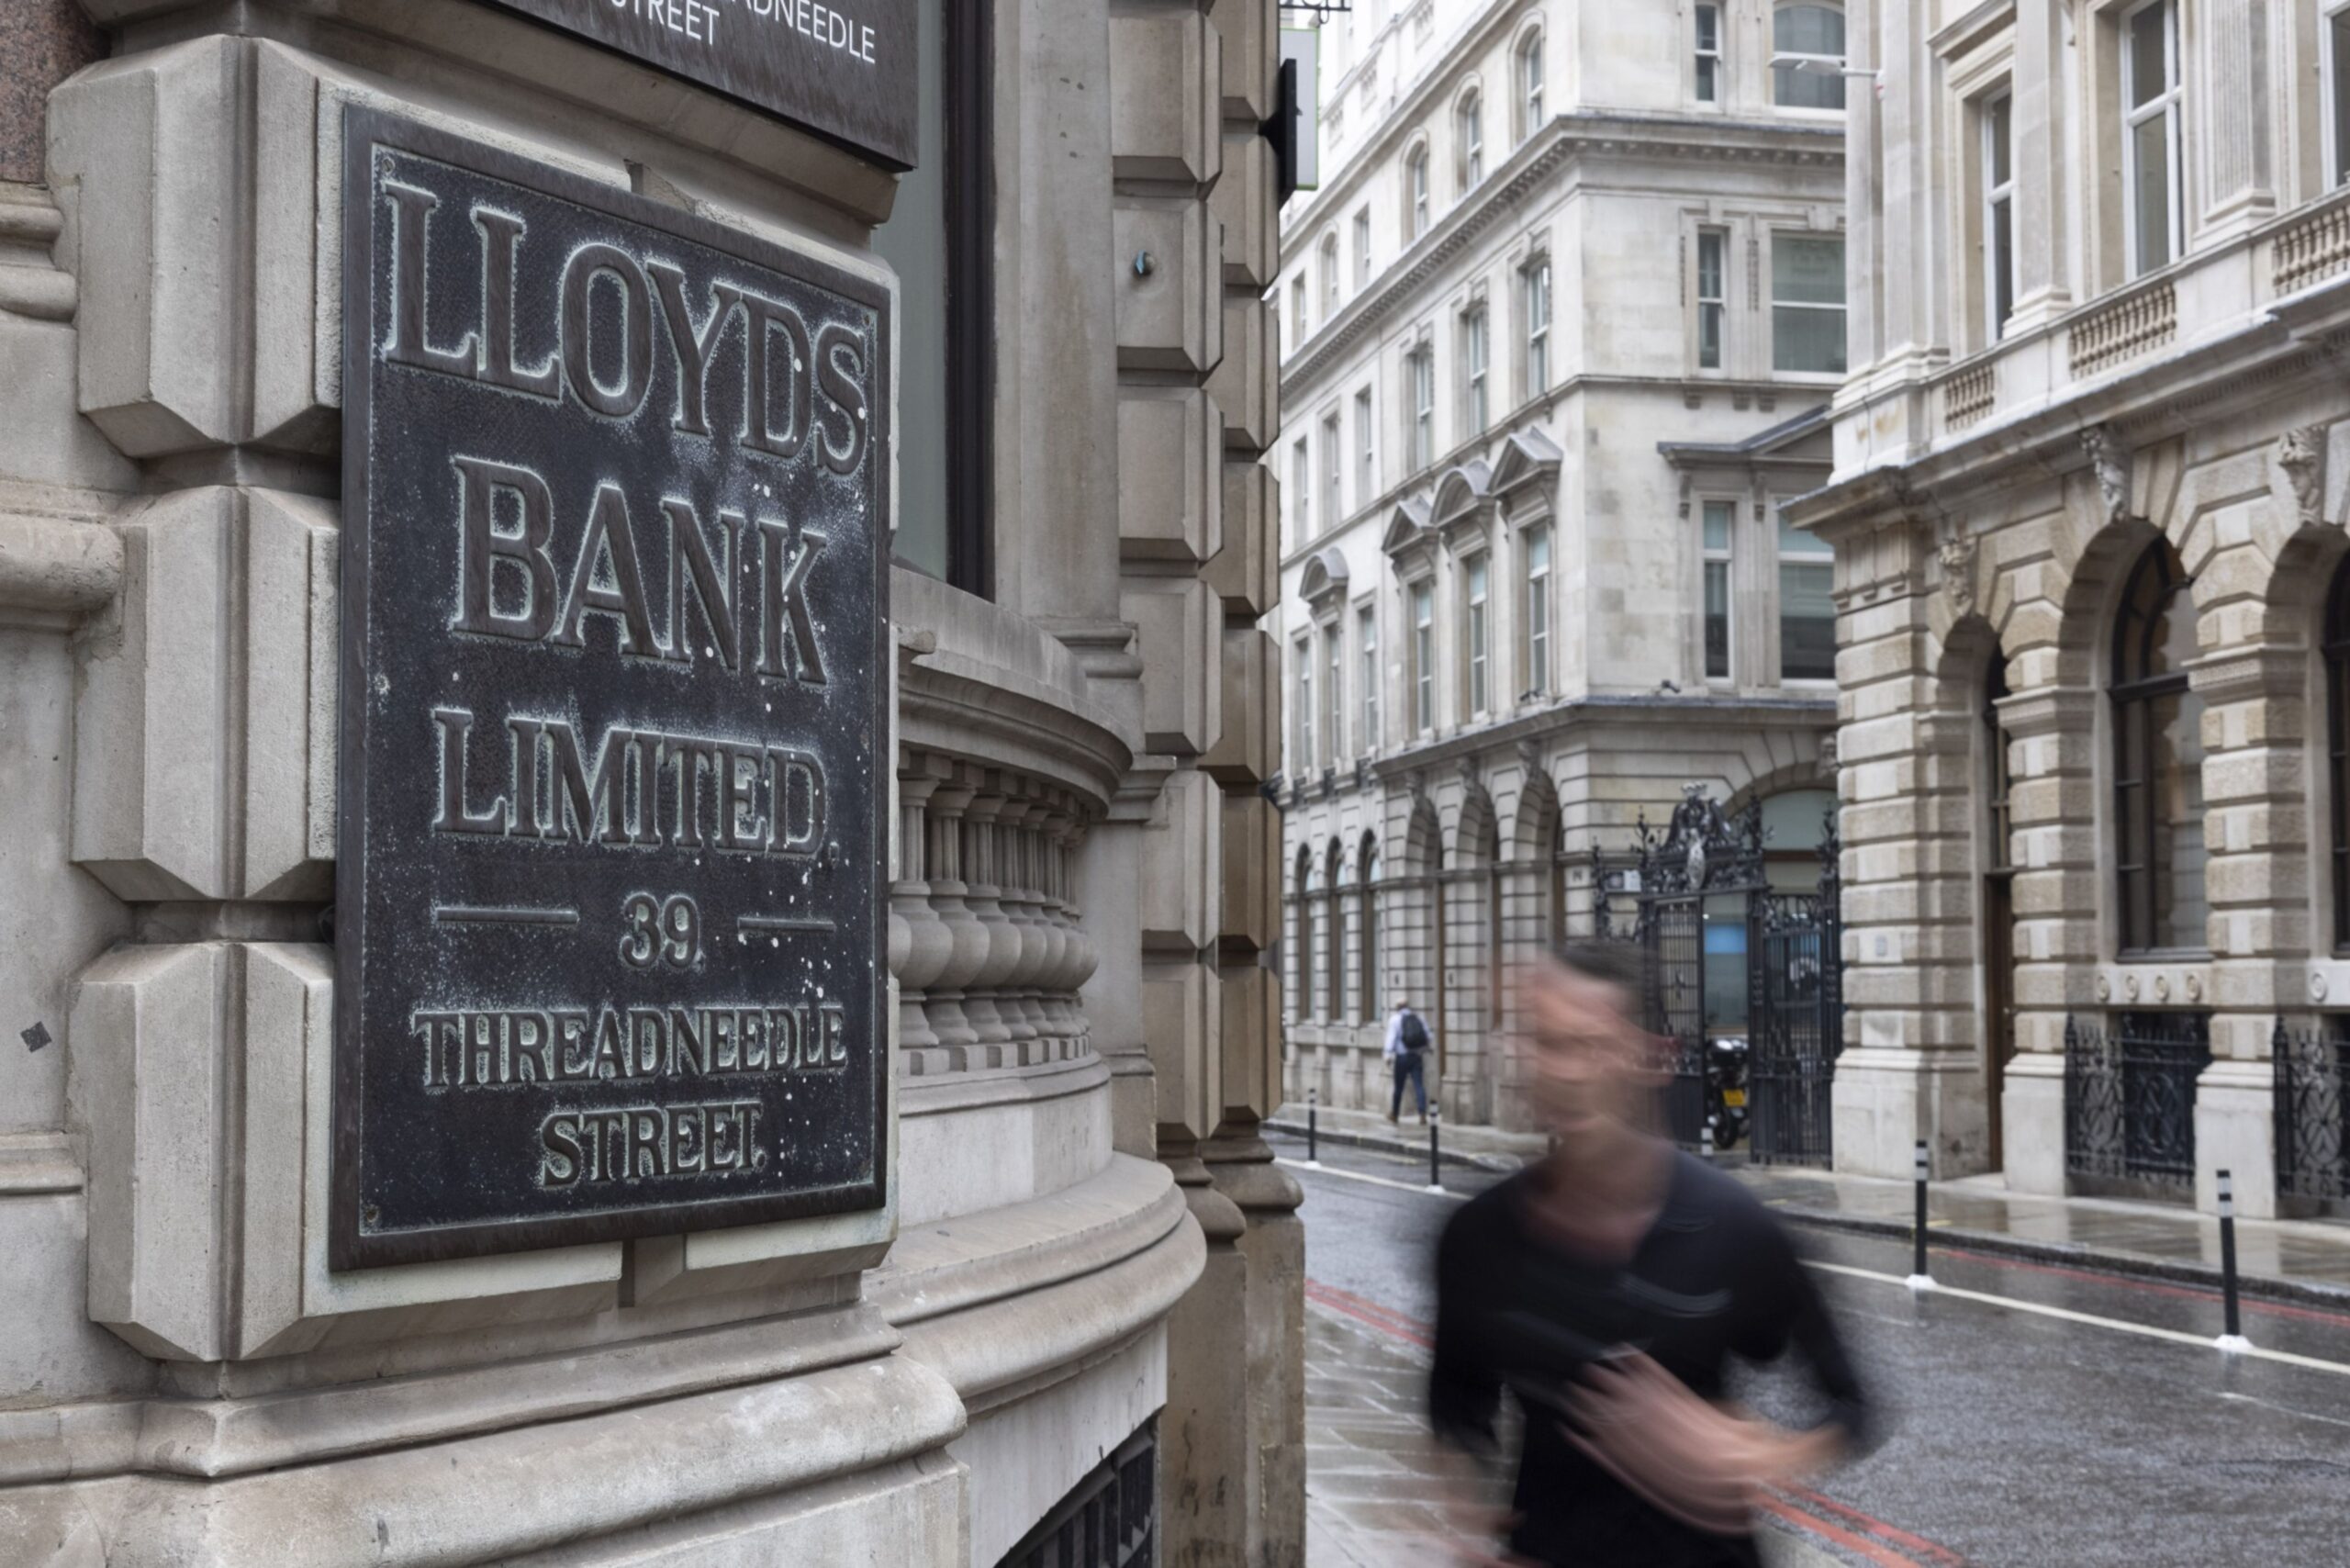 Lloyds Bank Fined 125m For Inaccurate